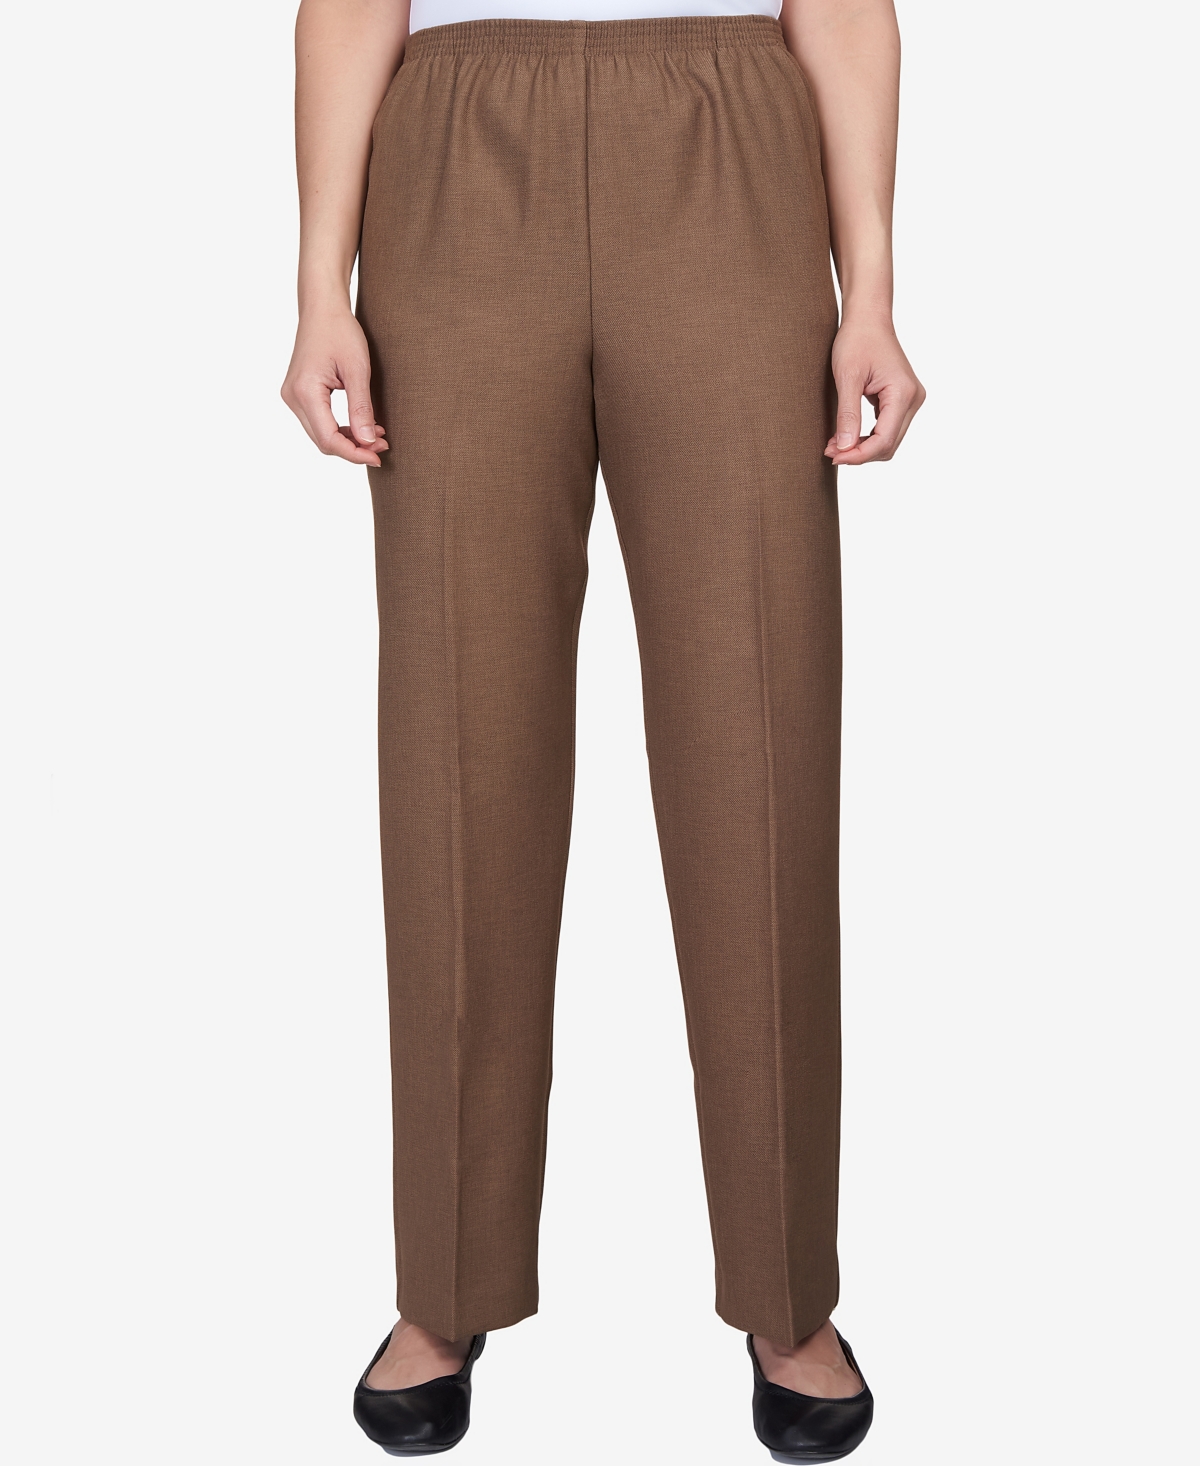 Petite Classic Textured Mid Rise Pull-On Pants - Taupe